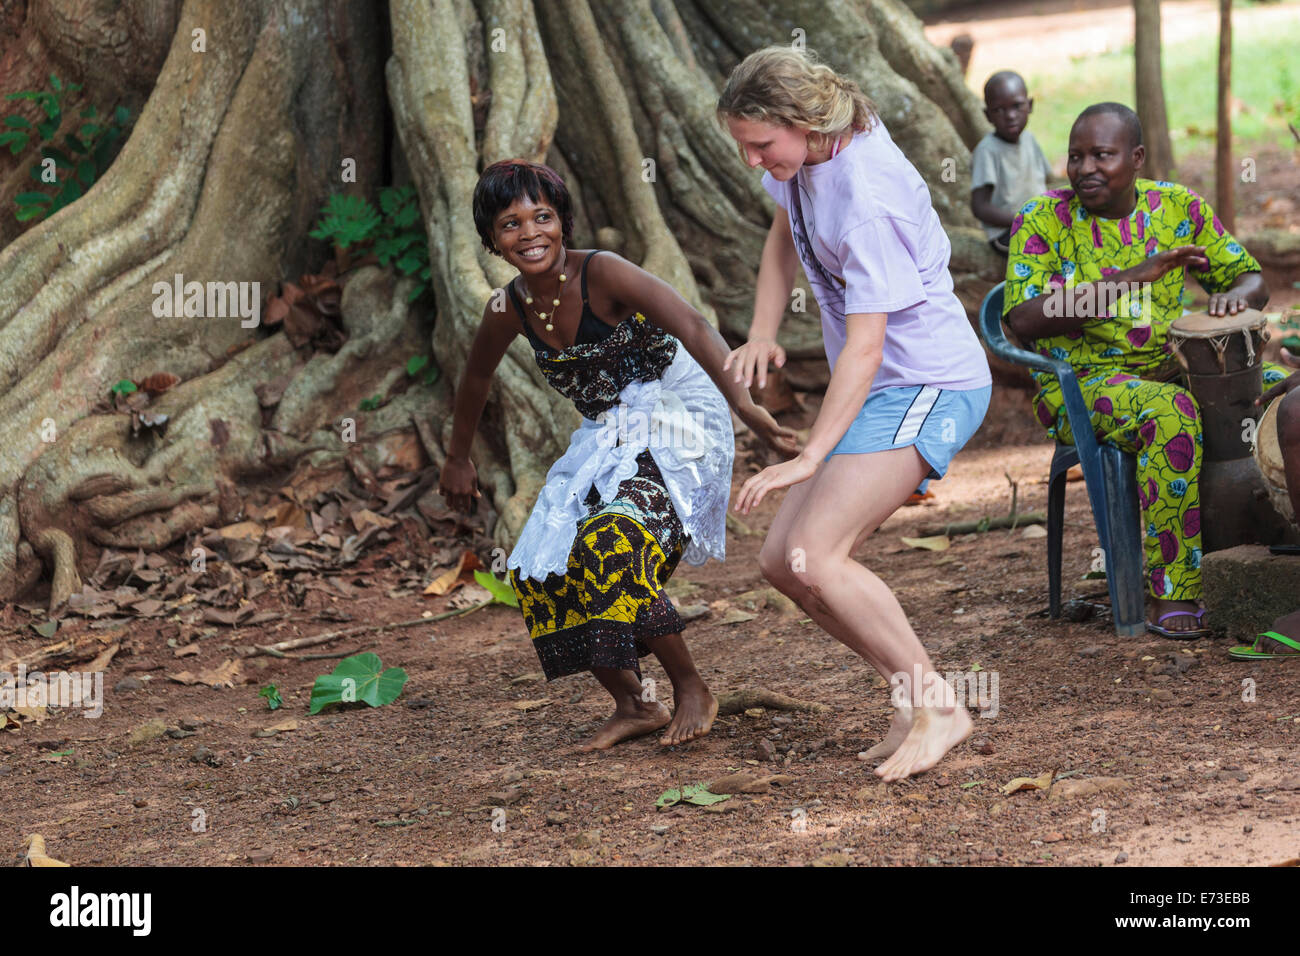 Africa, Benin, Ouidah. Local woman dancing with tourist during voodoo dance in front of iroko tree in Kpasse Sacred Forest. Stock Photo